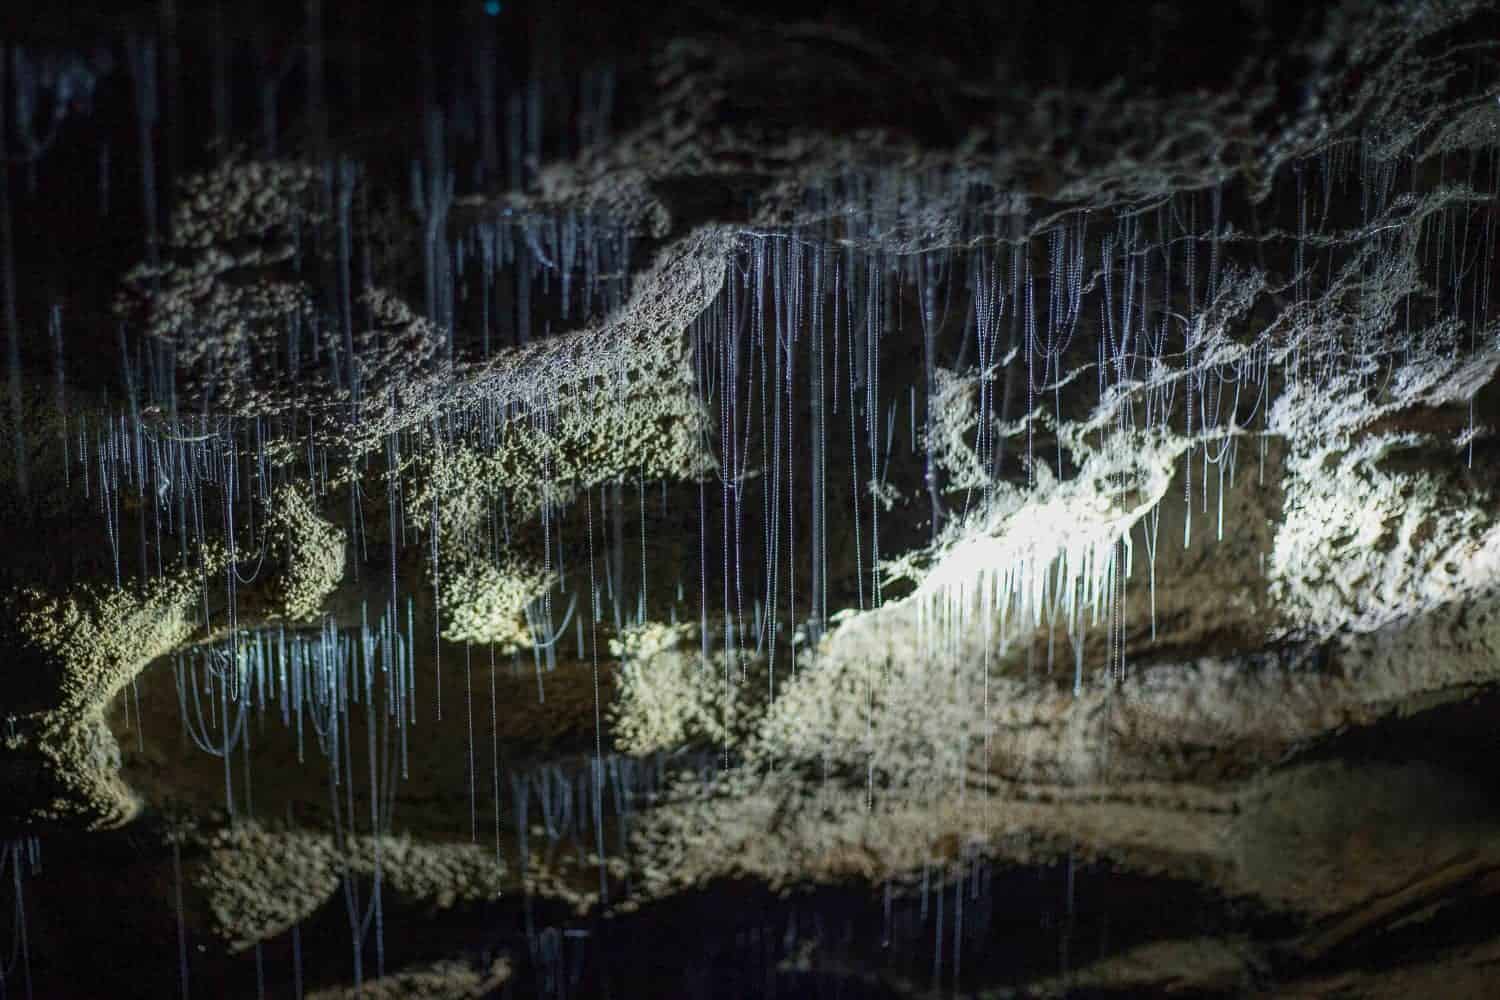 Glow worm Waitomo caves review